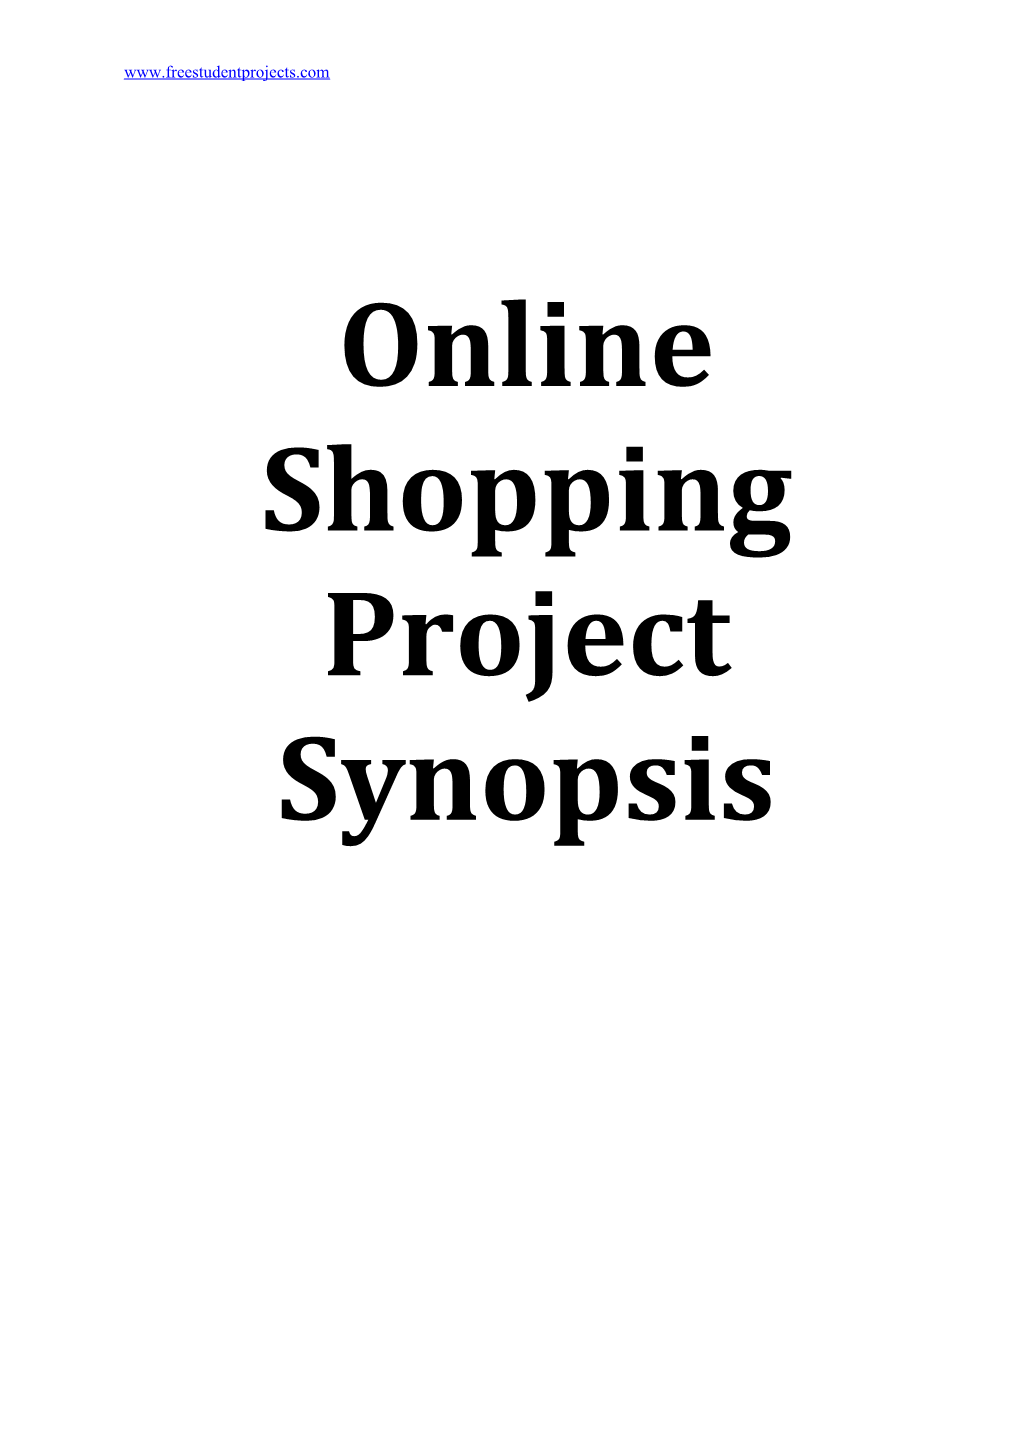 Online Shopping Project Synopsis